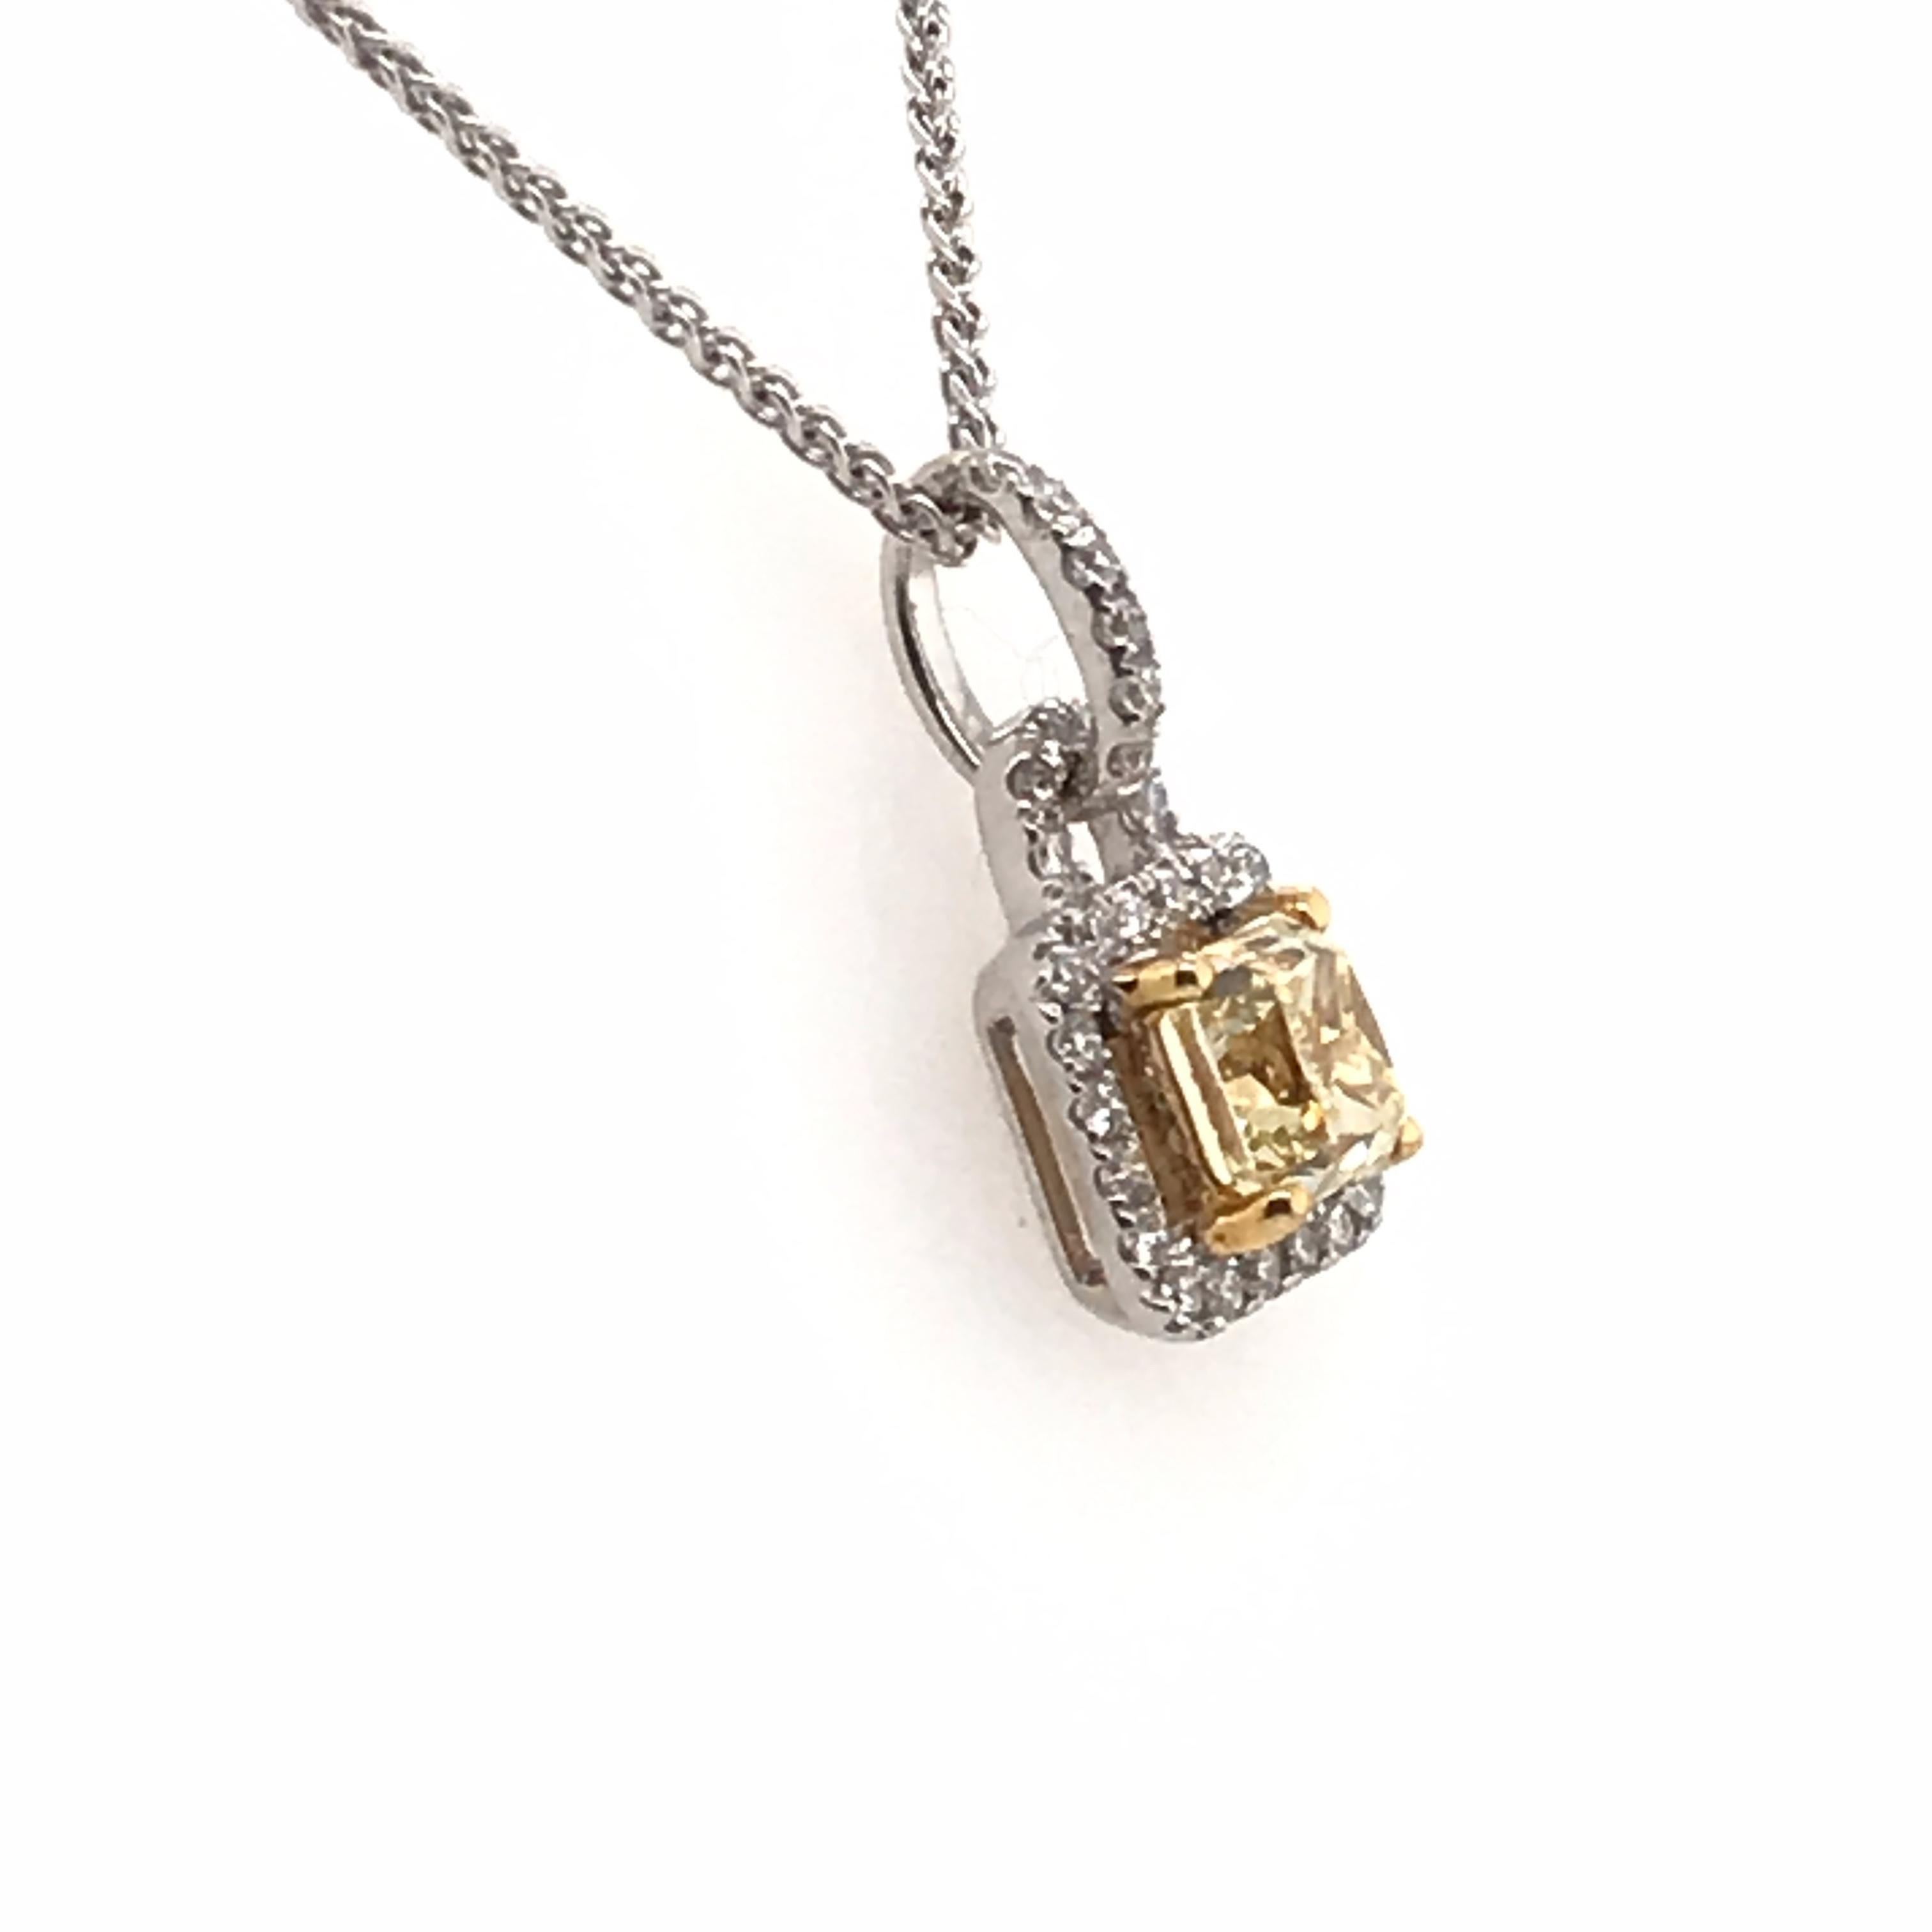 HJN Inc. Ring featuring a 1.03 Carat Natural Yellow Diamond Pendant.

Natural Yellow Diamond Weight: 0.83 Carats
Round-Cut Diamond Weight: 0.20 Carats

Total Stones: 32
Clarity Grade: VS1
Color Grade: H
Total Diamond Weight: 1.03
Polish and